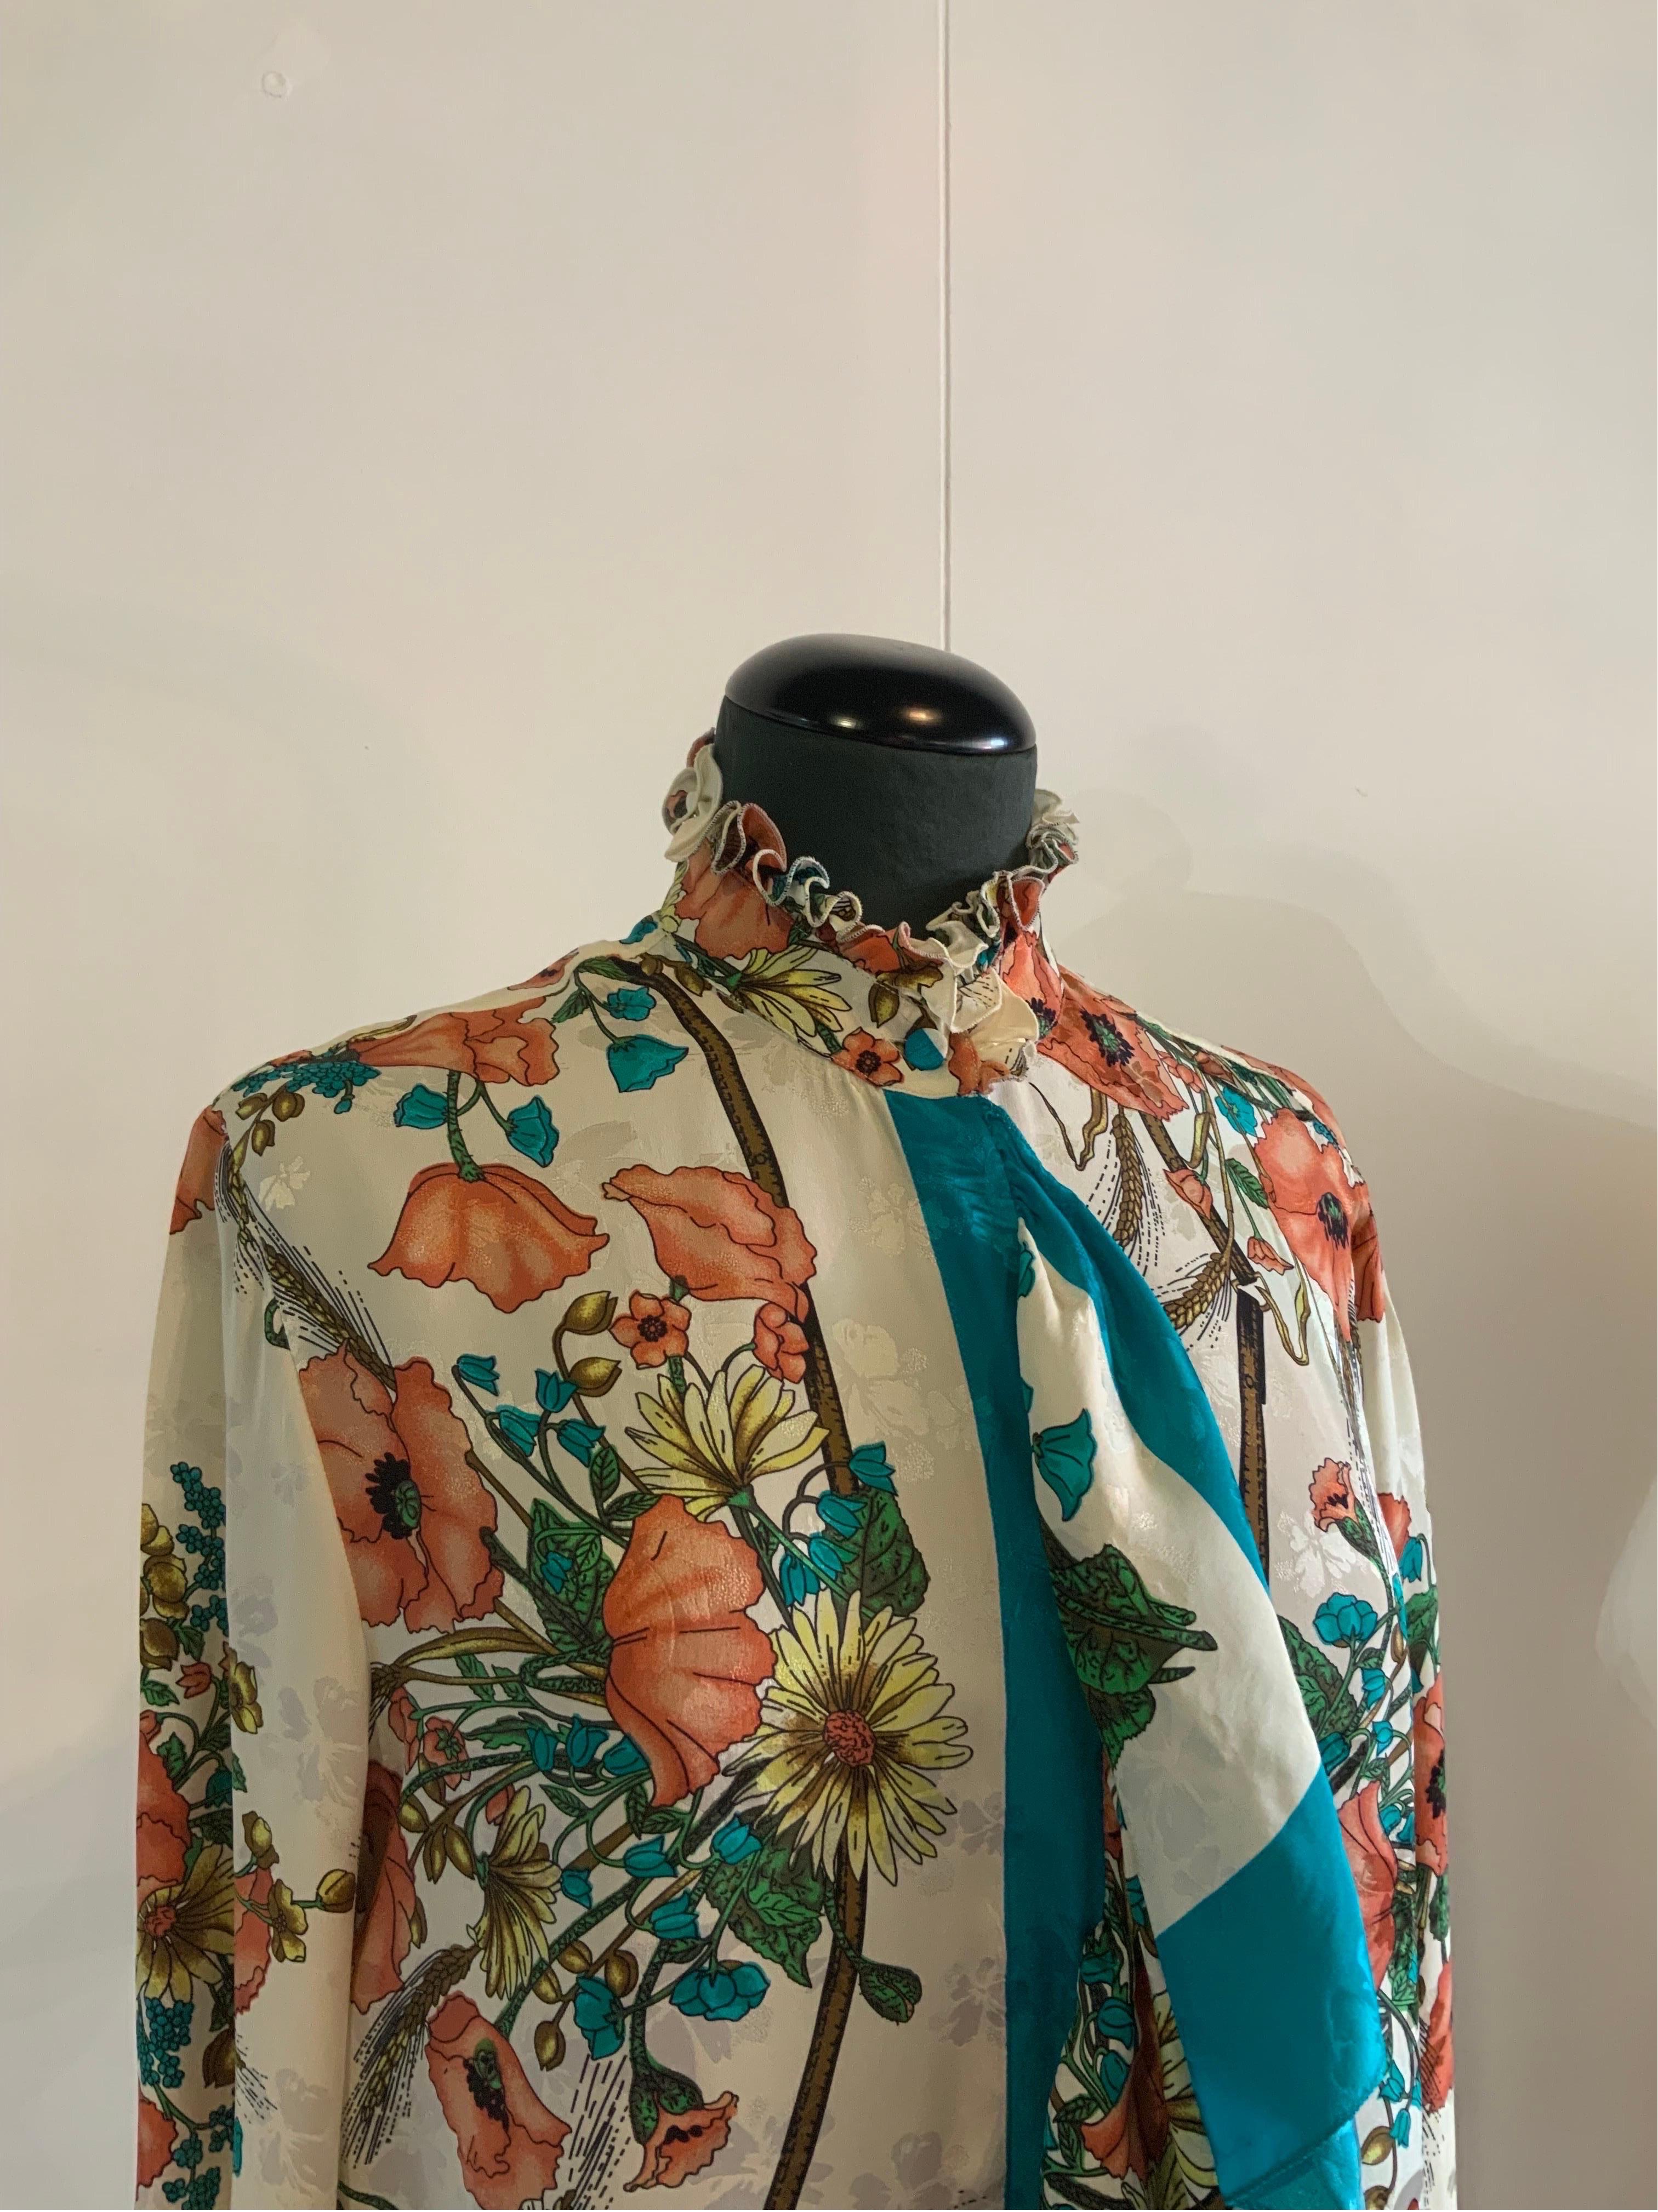 Gucci 19 Ruffled floral silk Jaquard Bluse.
Composition label missing but we think it is silk.
Italian size 40.
Shoulders 40 cm
Bust 54 cm
Length 74 cm
Sleeve 70 cm
Excellent general condition, like new.